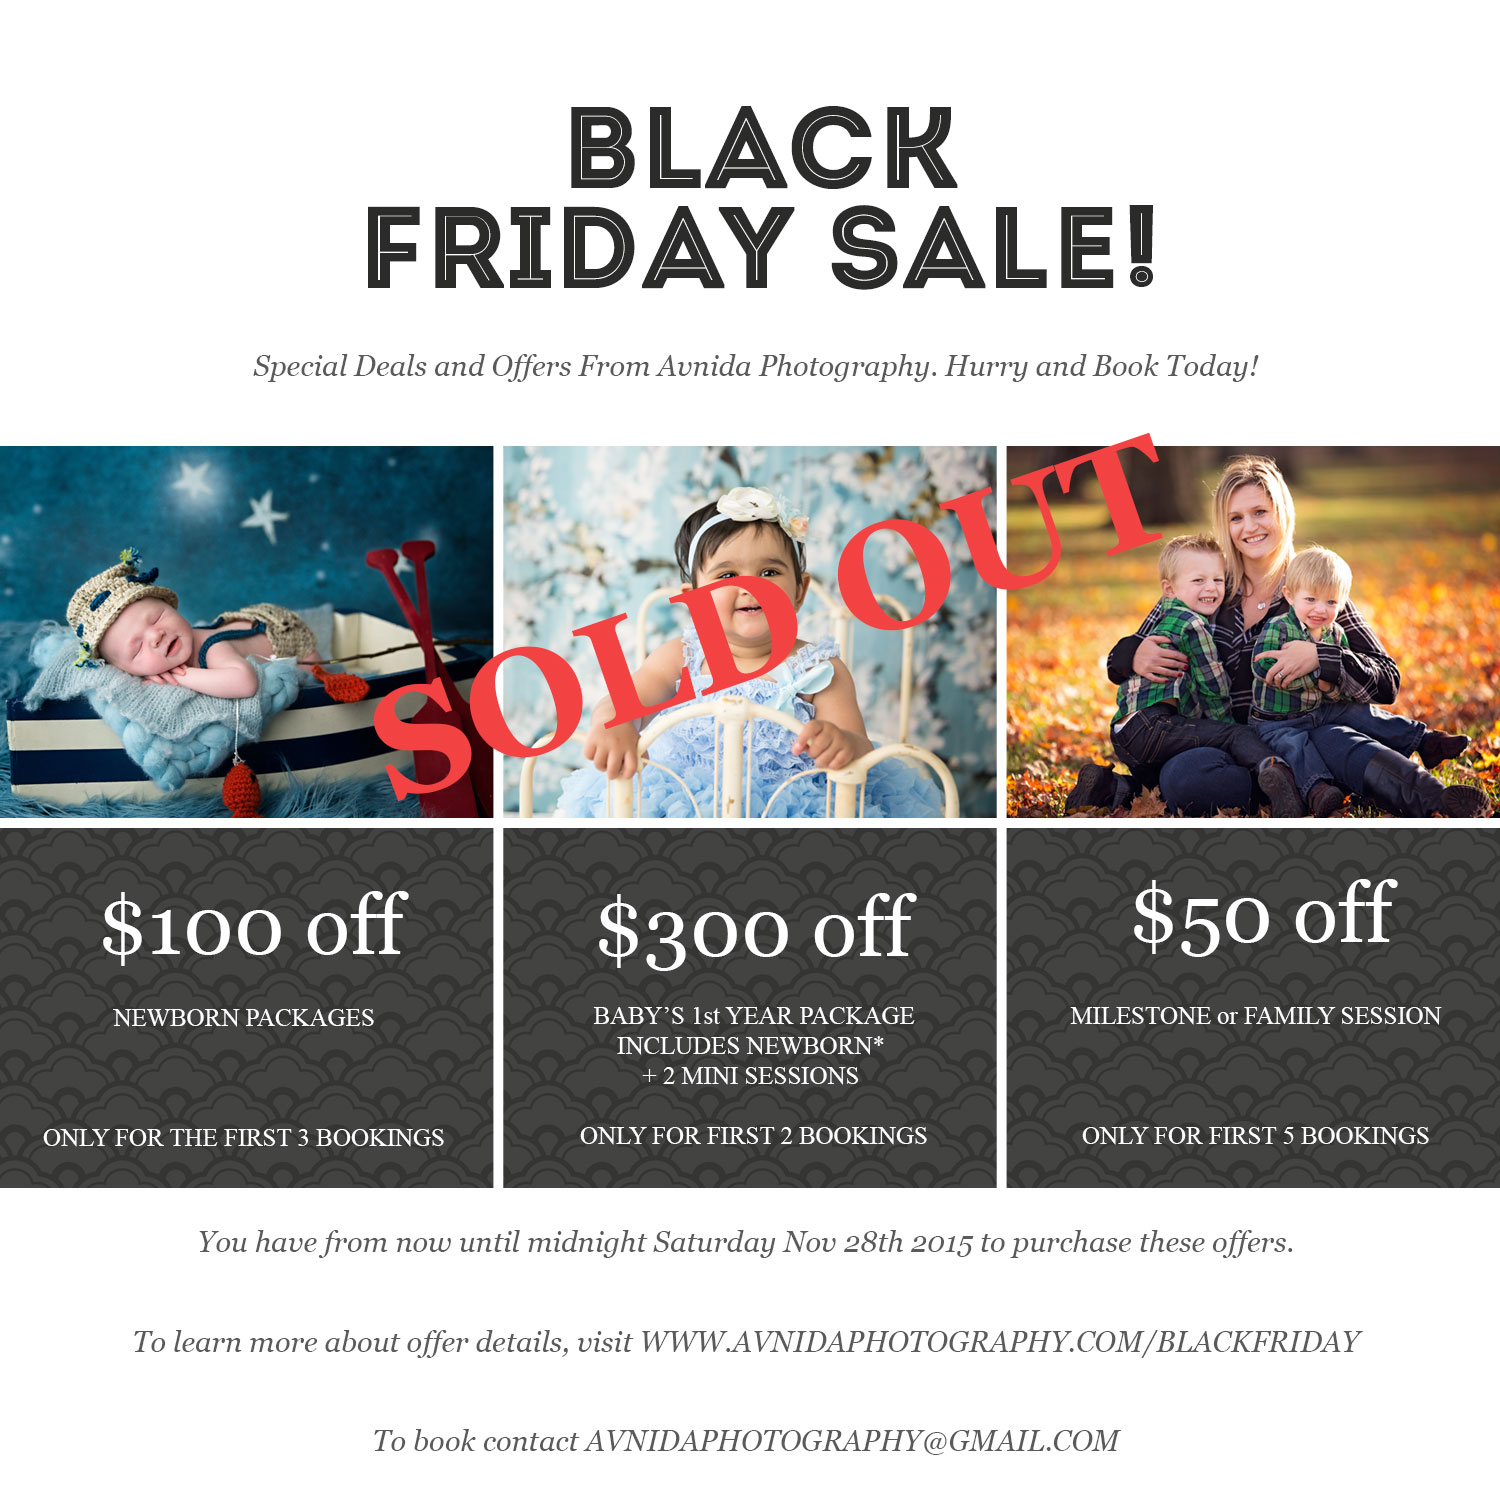 BLACK FRIDAY SALE! Up to $300 Off for Photo Sessions! - Does Nordictrack Offer Black Friday Deals